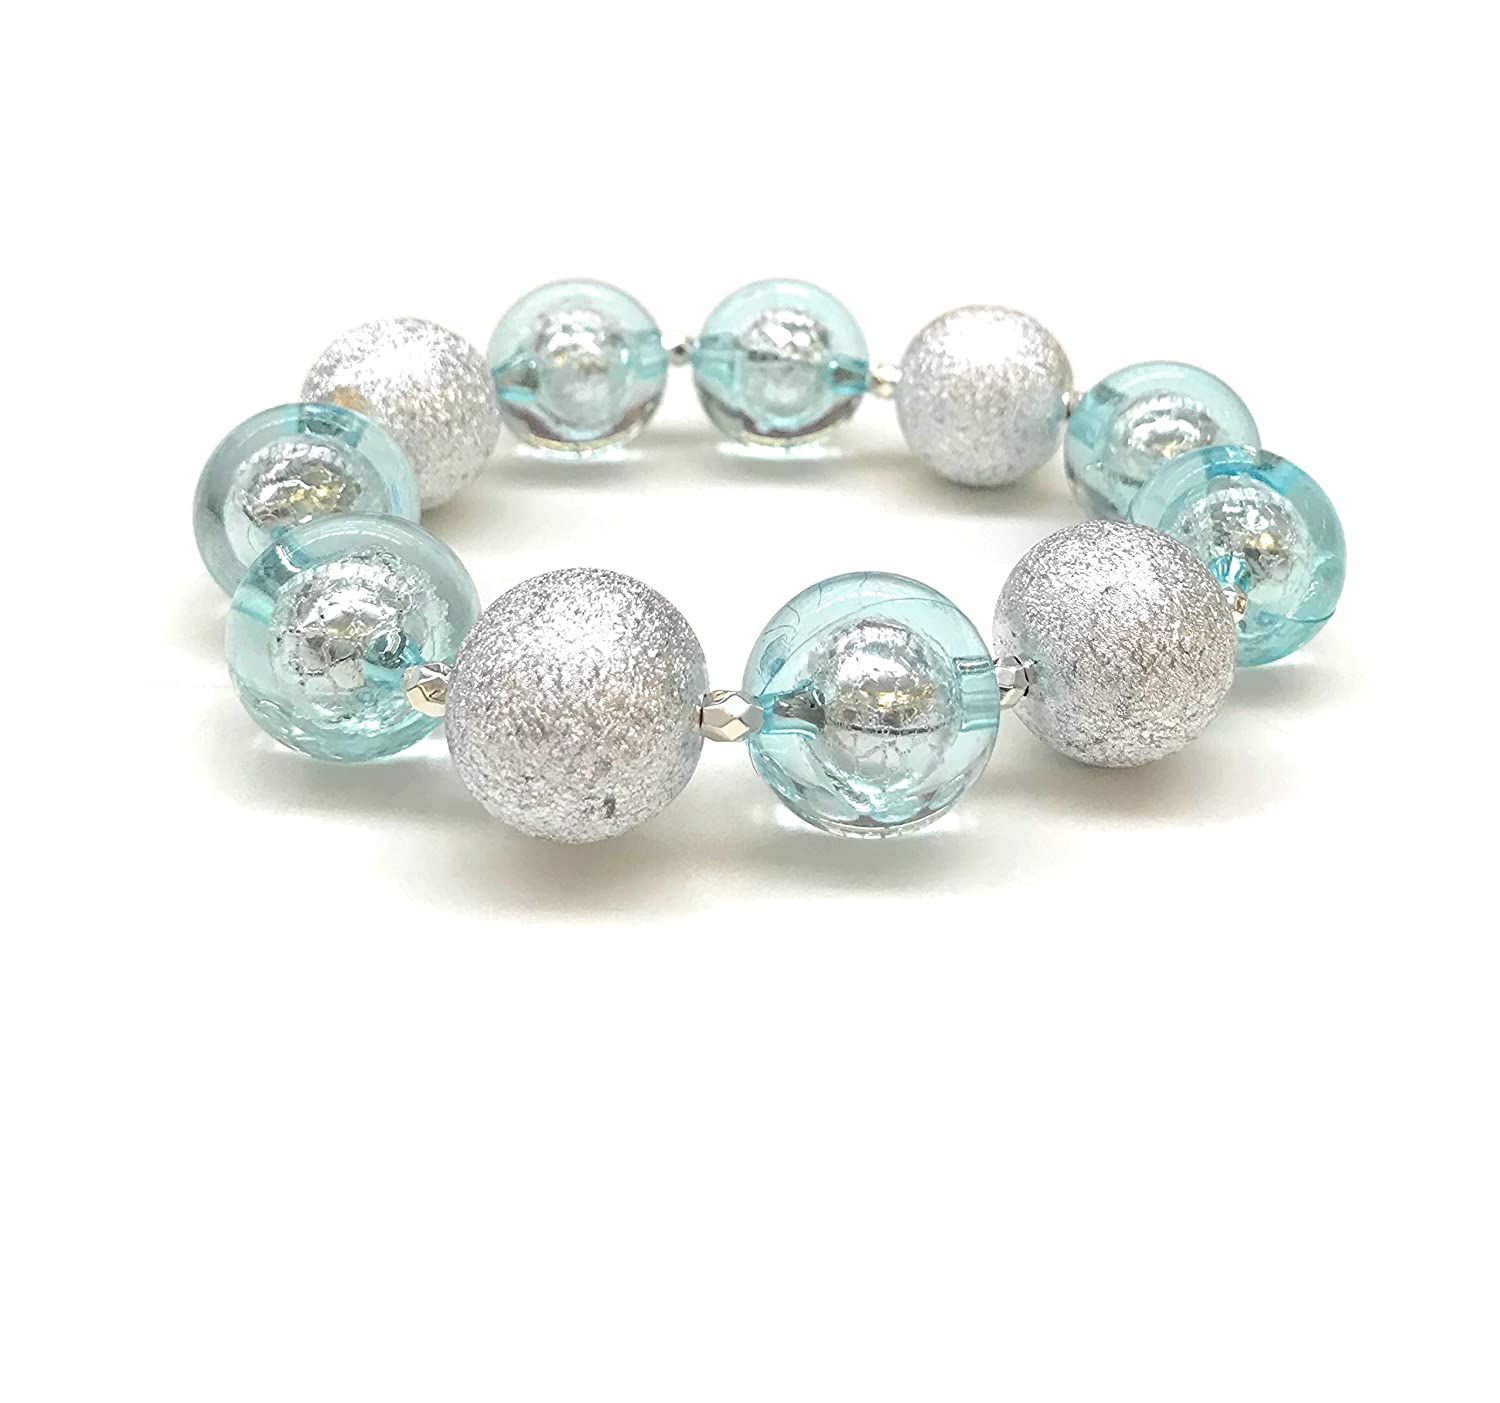 Beaded glass stretching bracelet sparkling accent spacer beads